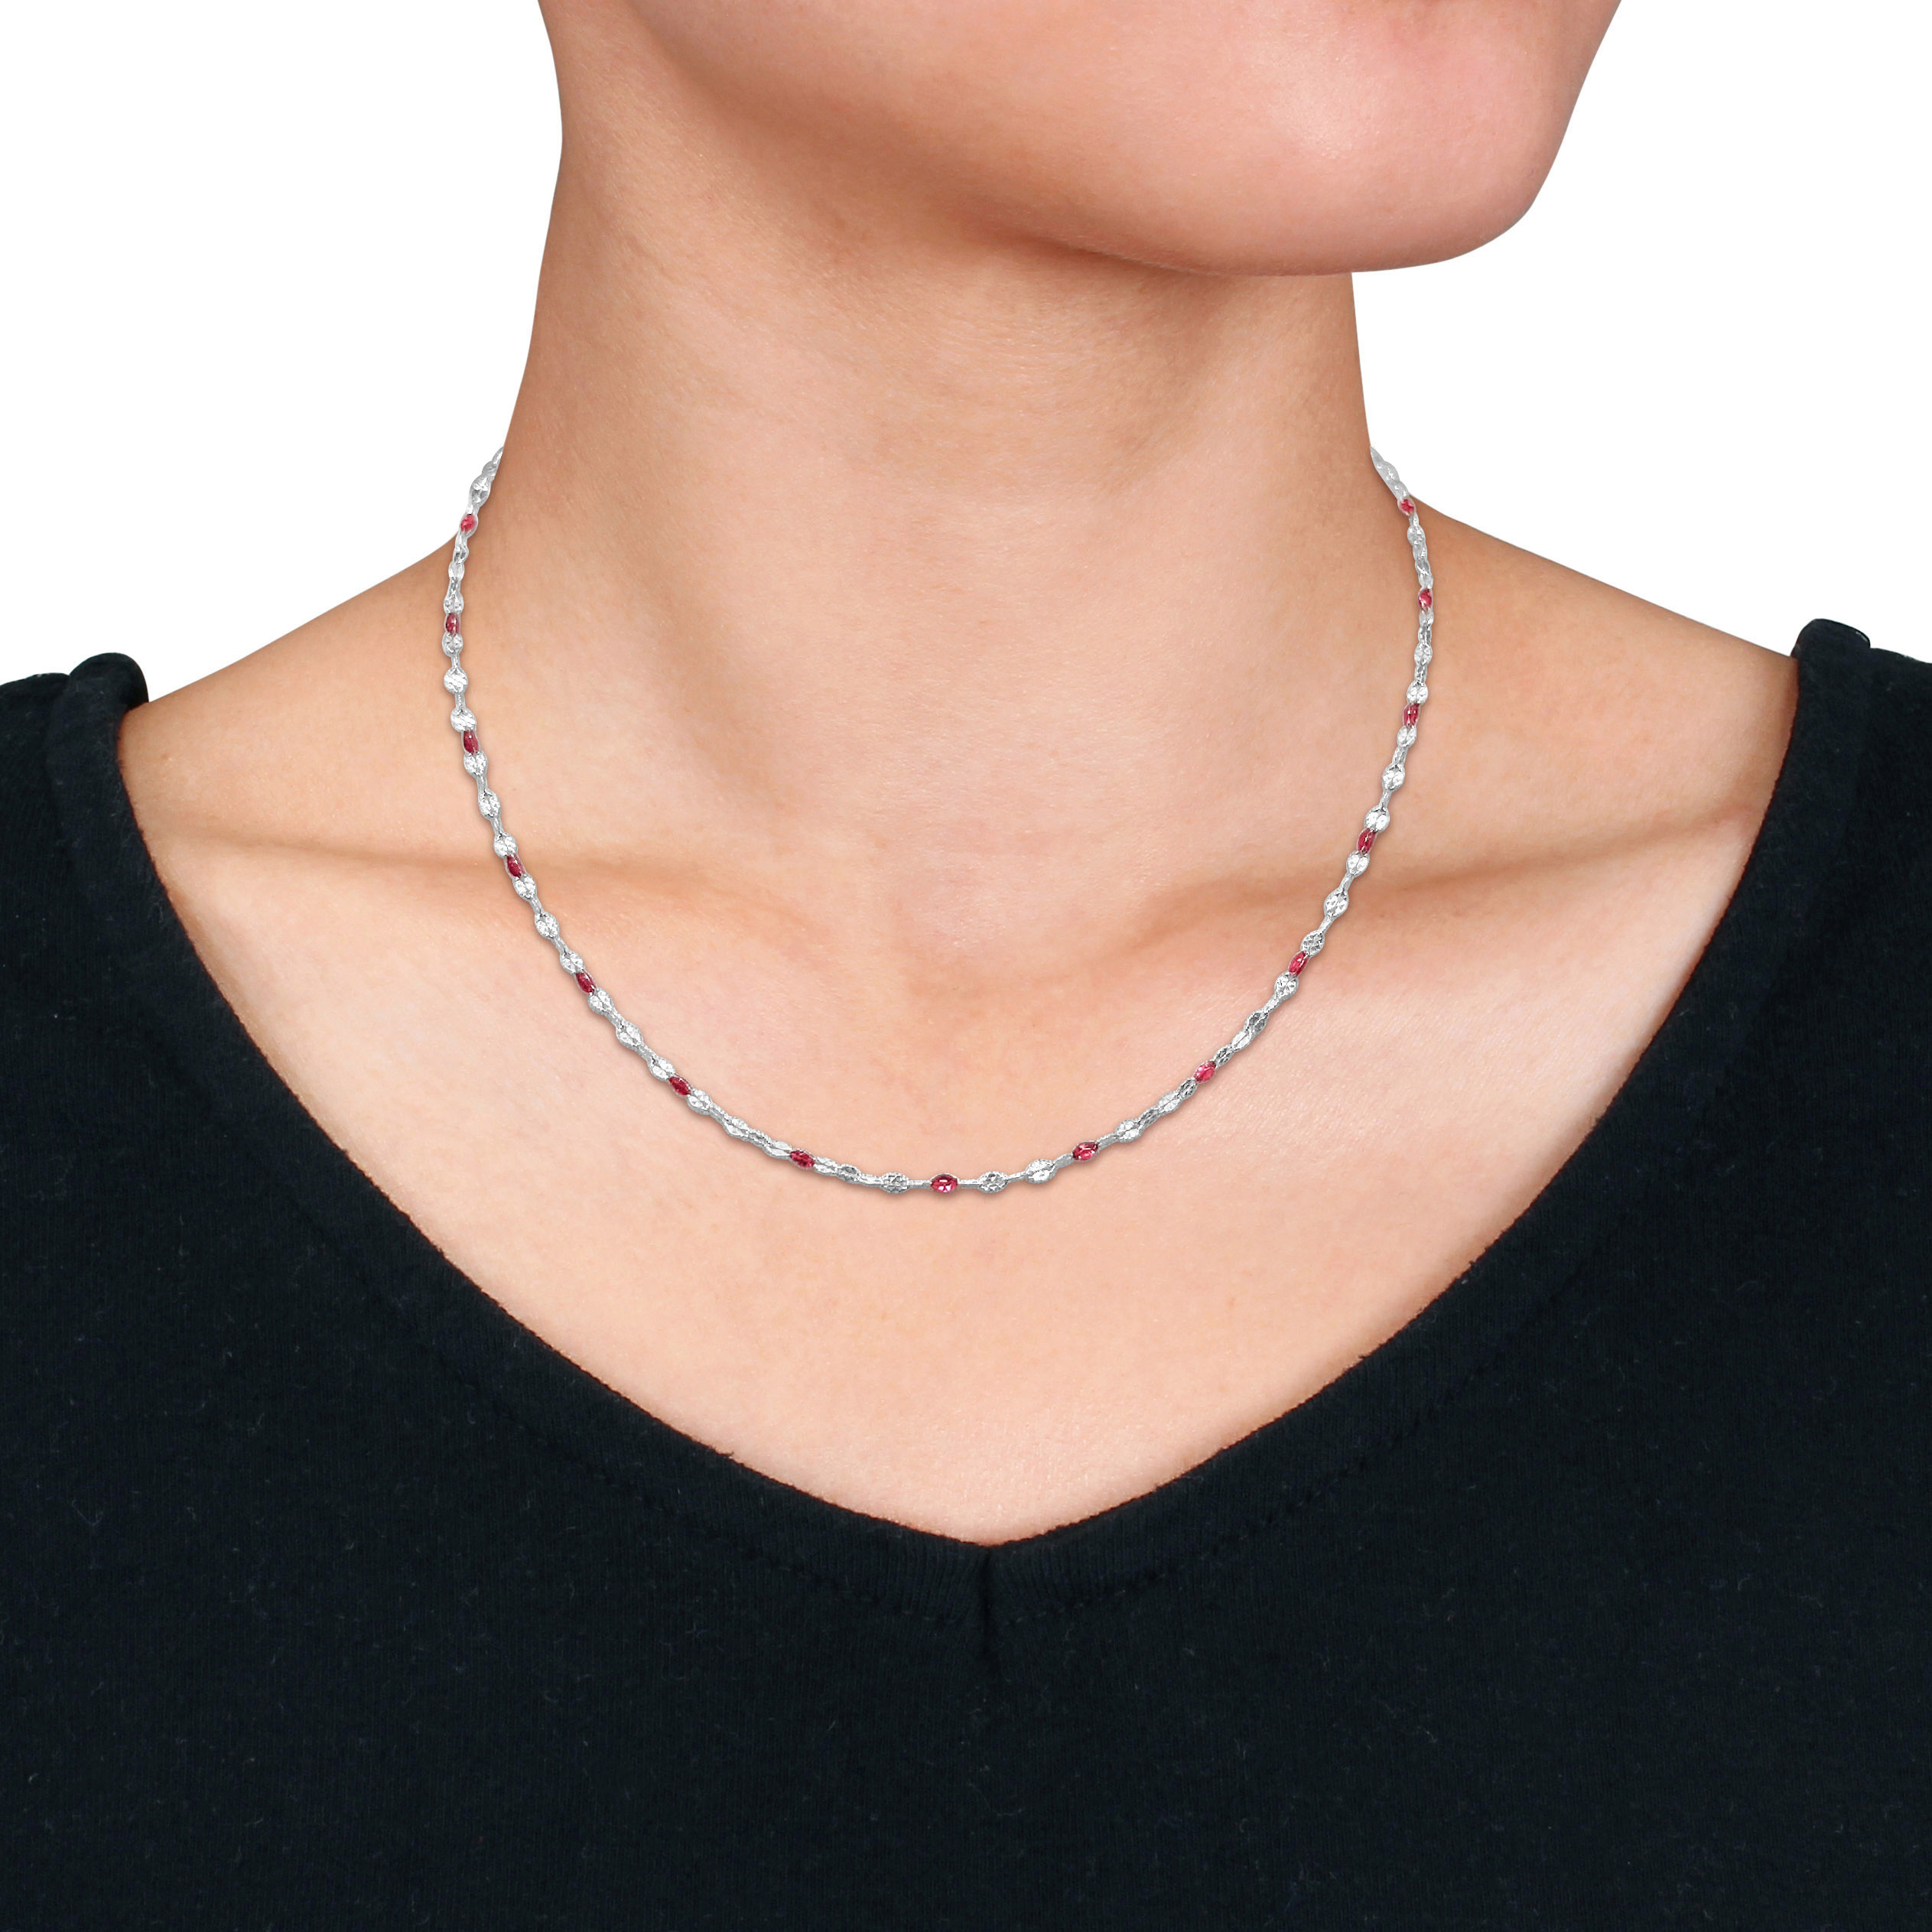 Pink Enamel Bead Station Necklace in Sterling Silver - 18 in.